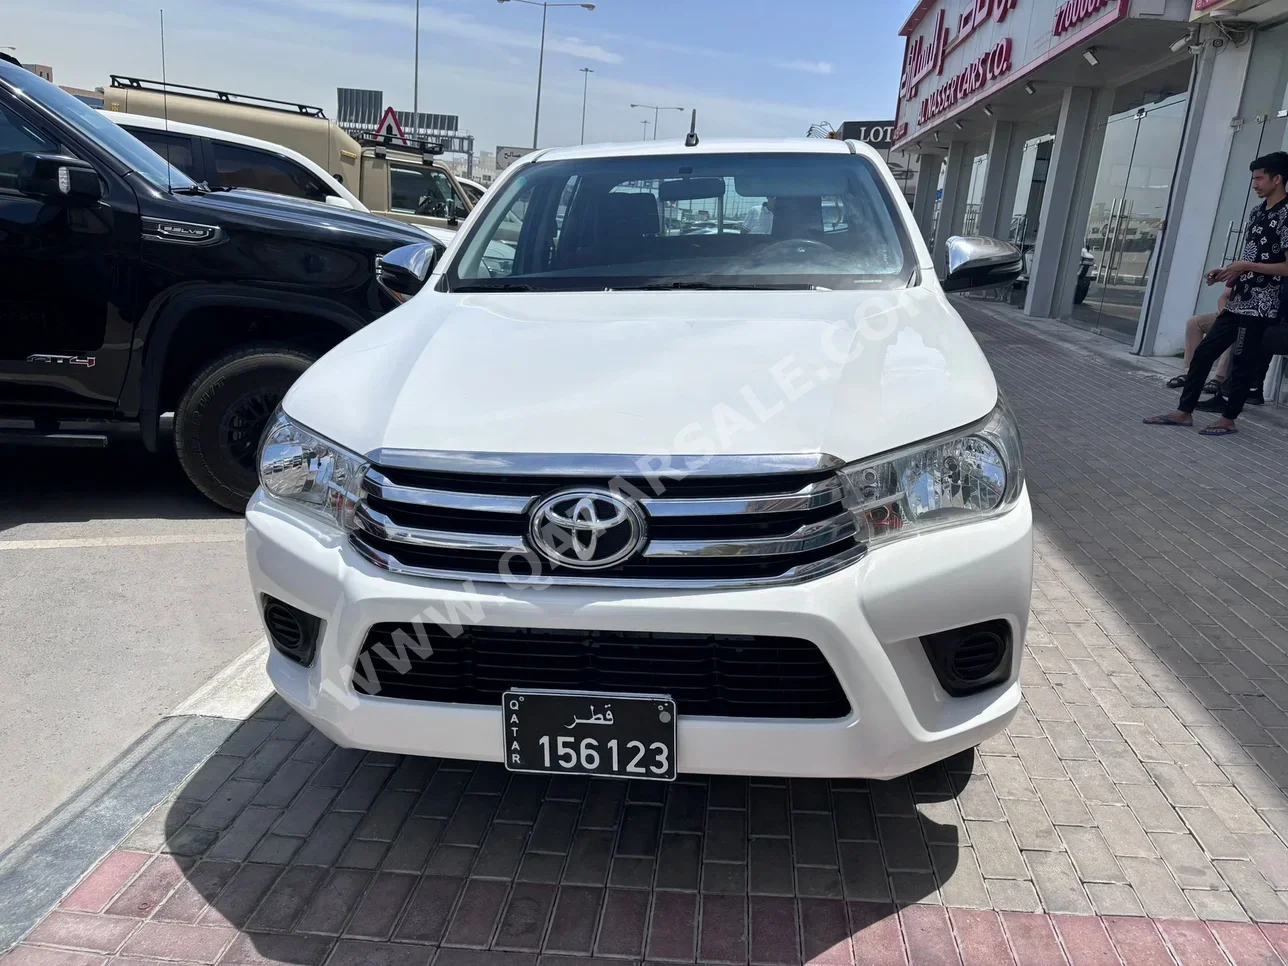 Toyota  Hilux  SR5  2019  Manual  350,000 Km  4 Cylinder  Four Wheel Drive (4WD)  Pick Up  White